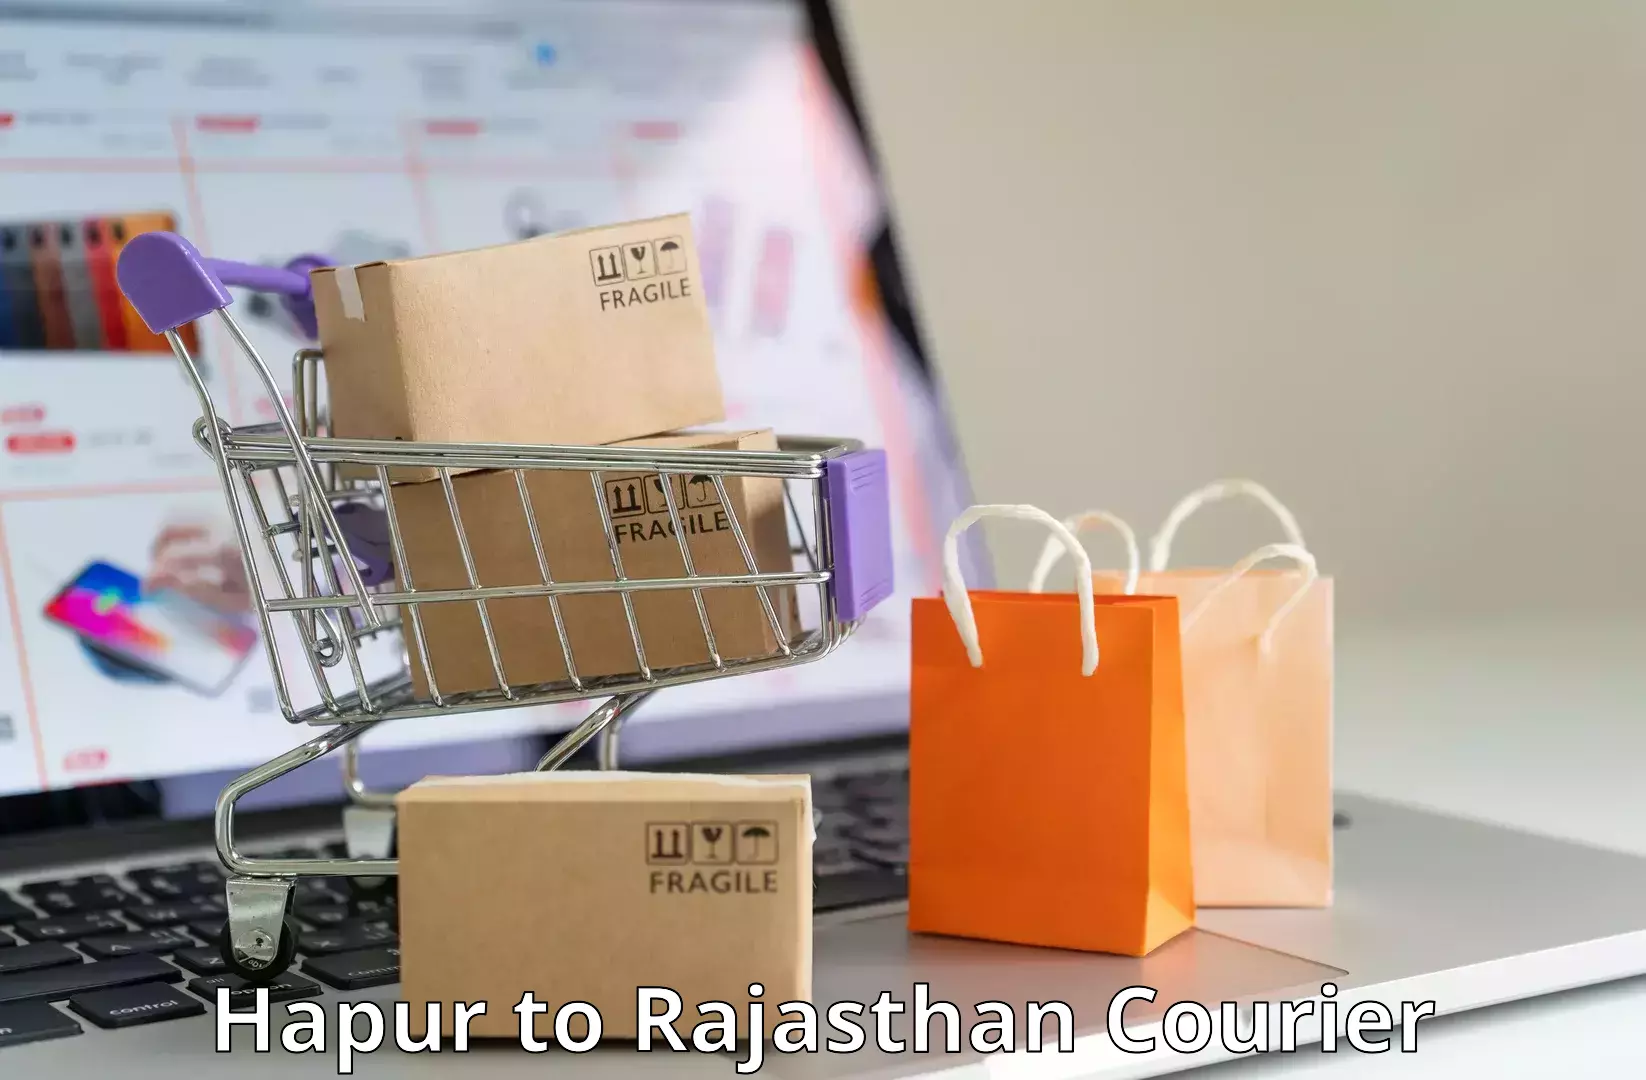 End-to-end delivery Hapur to Rajasthan